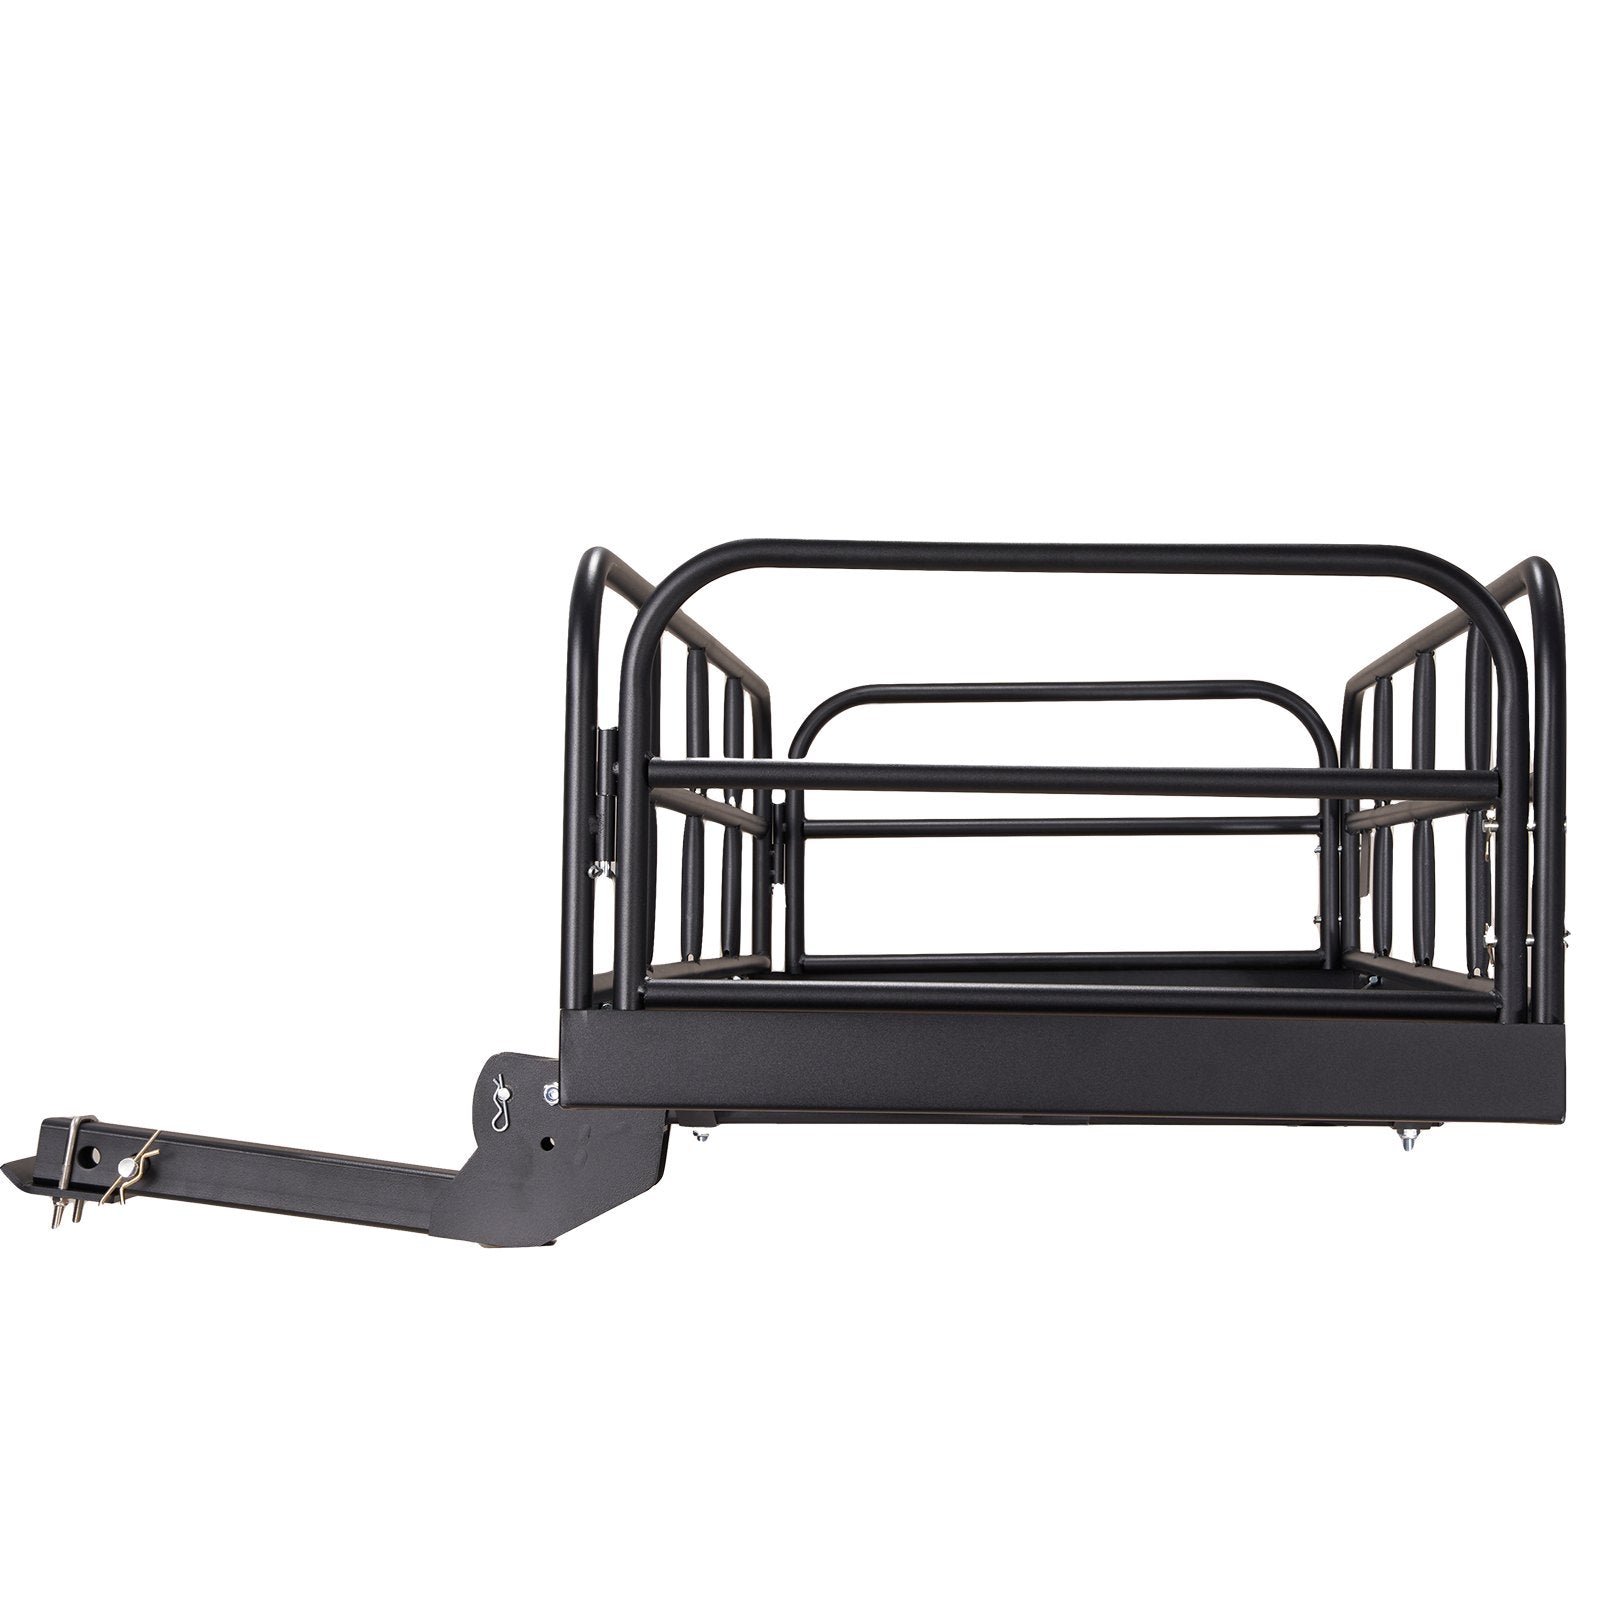 VEVOR Hitch Cargo Carrier, 60 x 24 x 14 in Folding Trailer Hitch Mounted Steel Cargo Basket, 400lbs Loading Capacity